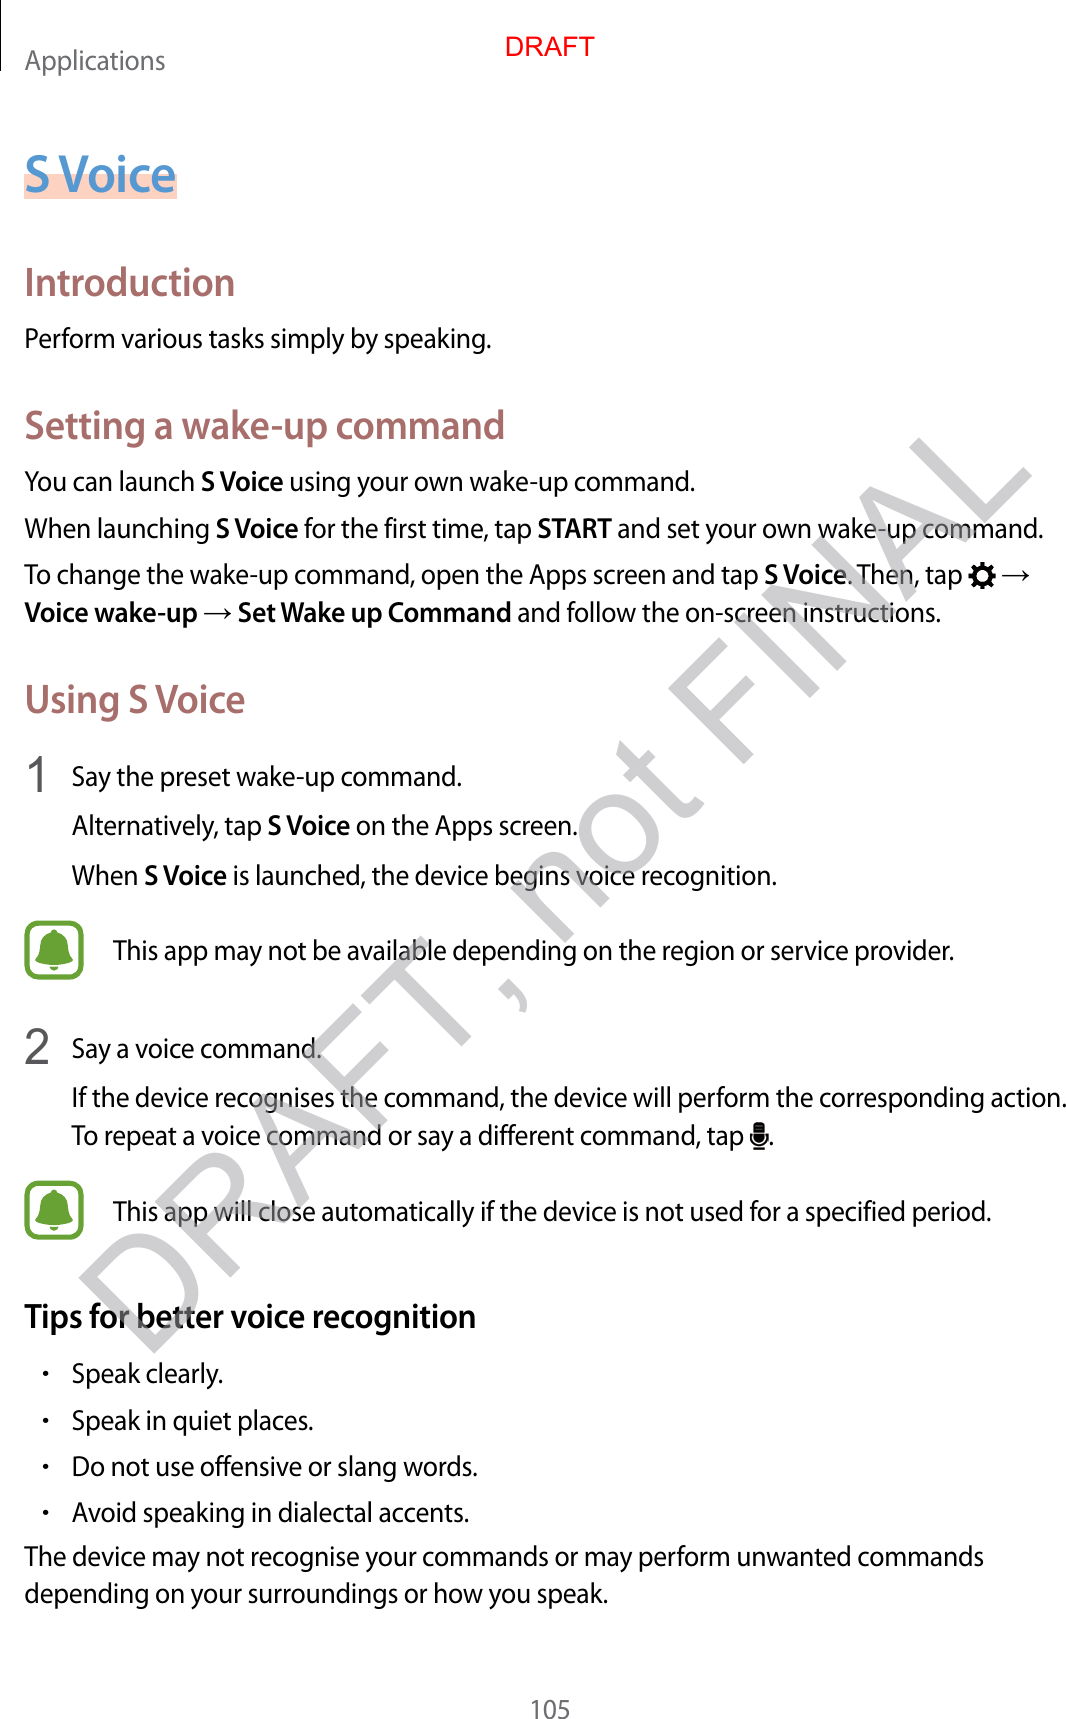 Applications105S V oiceIntroductionP erform various tasks simply by speaking.Setting a wake-up commandYou can launch S V oice using your own w ake-up command.When launching S V oice for the first time , tap START and set your own w ake-up command.To change the wake-up command, open the A pps scr een and tap S V oice. Then, tap    Voice wak e-up  Set Wake up Command and follo w the on-scr een instructions.Using S Voice1  Say the preset w ake-up command .Alternativ ely, tap S V oice on the Apps screen.When S V oice is launched, the device beg ins v oic e r ecog nition.This app may not be a vailable depending on the r eg ion or service provider.2  Say a voic e command .If the device recog nises the command , the devic e will perform the c orresponding action. To repeat a v oic e command or sa y a diff er en t command , tap  .This app will close automatically if the devic e is not used f or a specified period .T ips f or bett er v oic e r ec ognition•Speak clearly.•Speak in quiet places.•Do not use offensiv e or slang w or ds .•A v oid speaking in dialectal accen ts .The device ma y not r ecog nise y our c ommands or may perform unwant ed c ommands depending on your surroundings or ho w y ou speak.DRAFTDRAFT, not FINAL